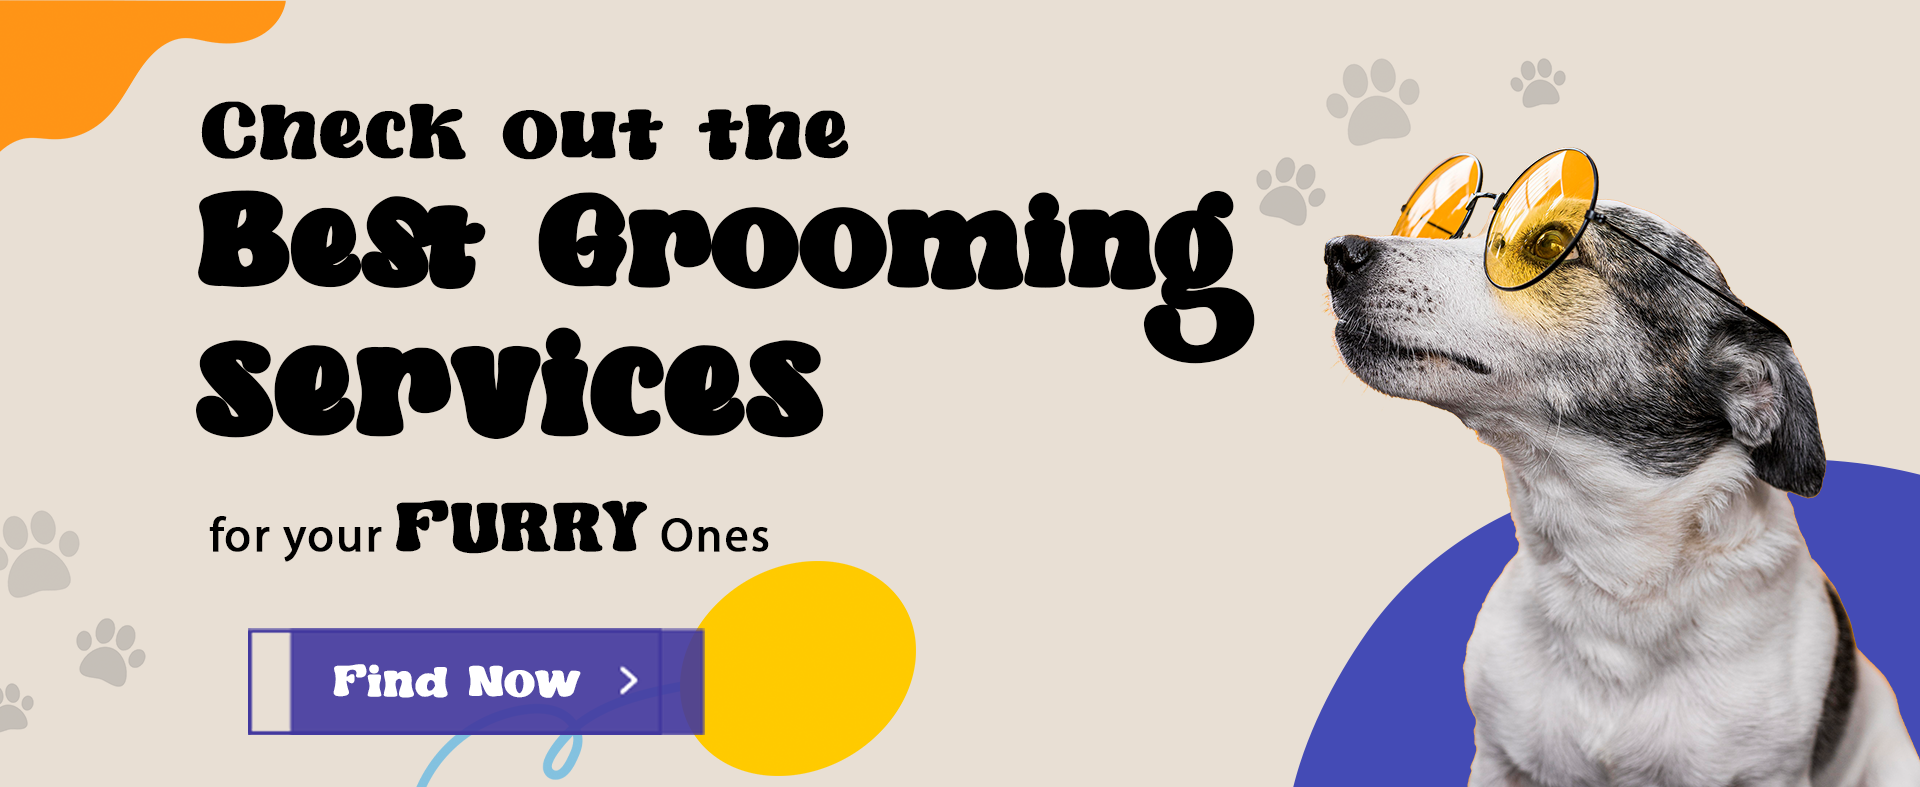 One-stop solution for all Pet Services in your City - Petofy